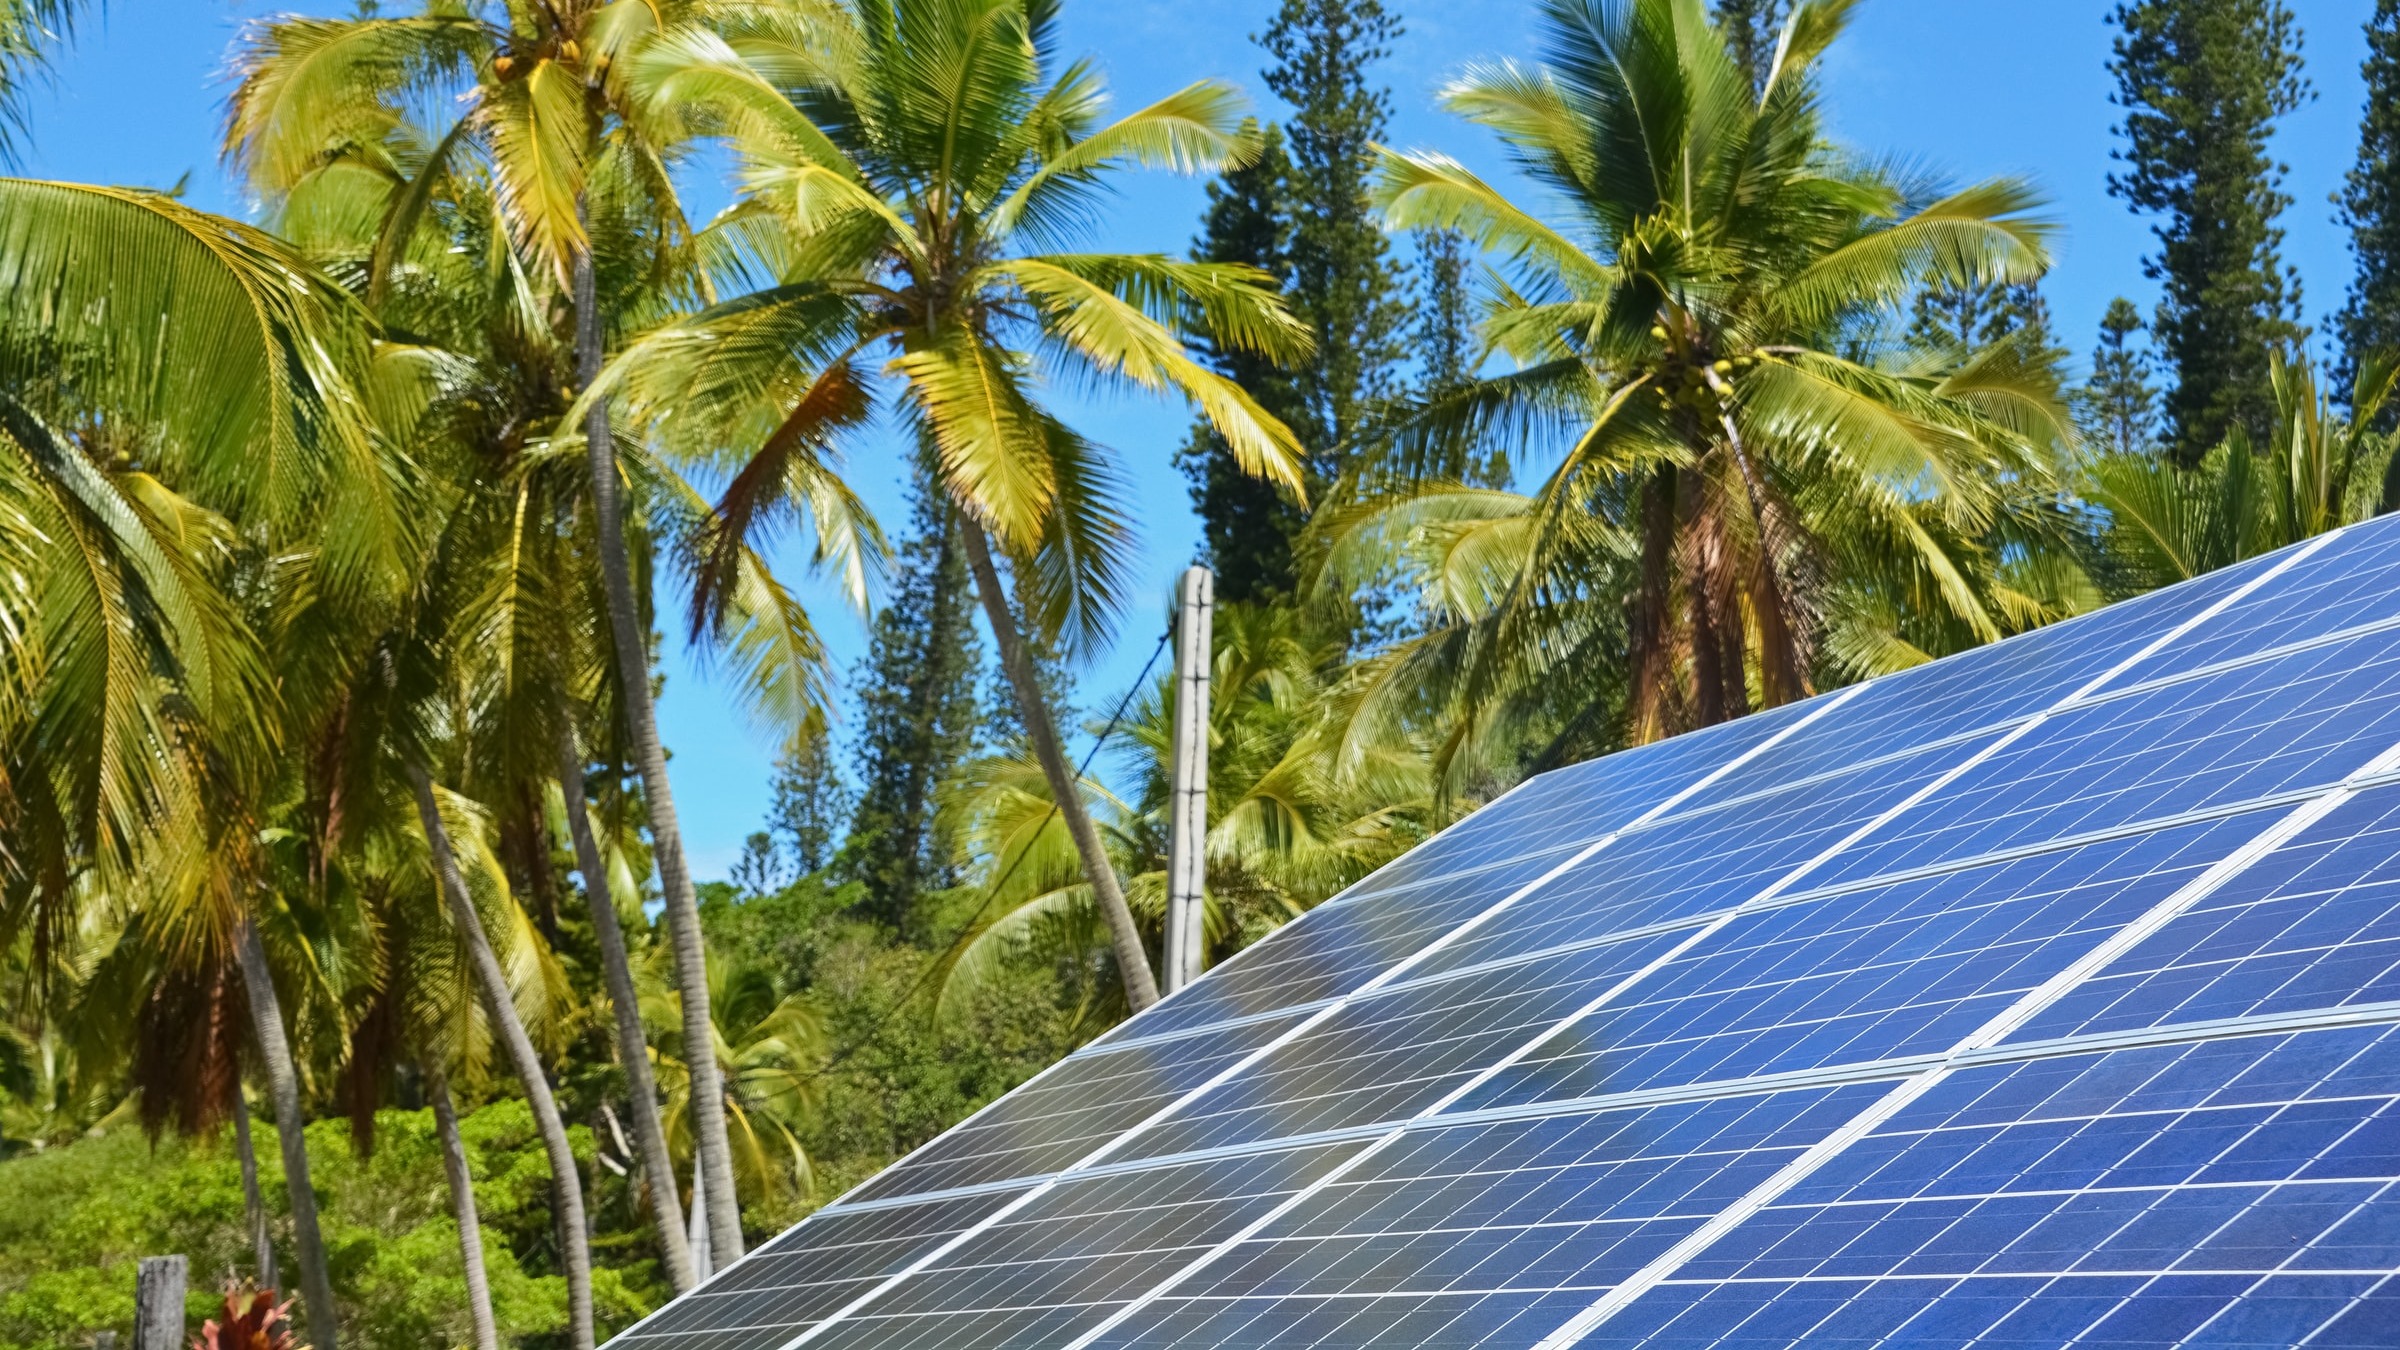 Pacific Island Countries must urgently transition to renewable energy